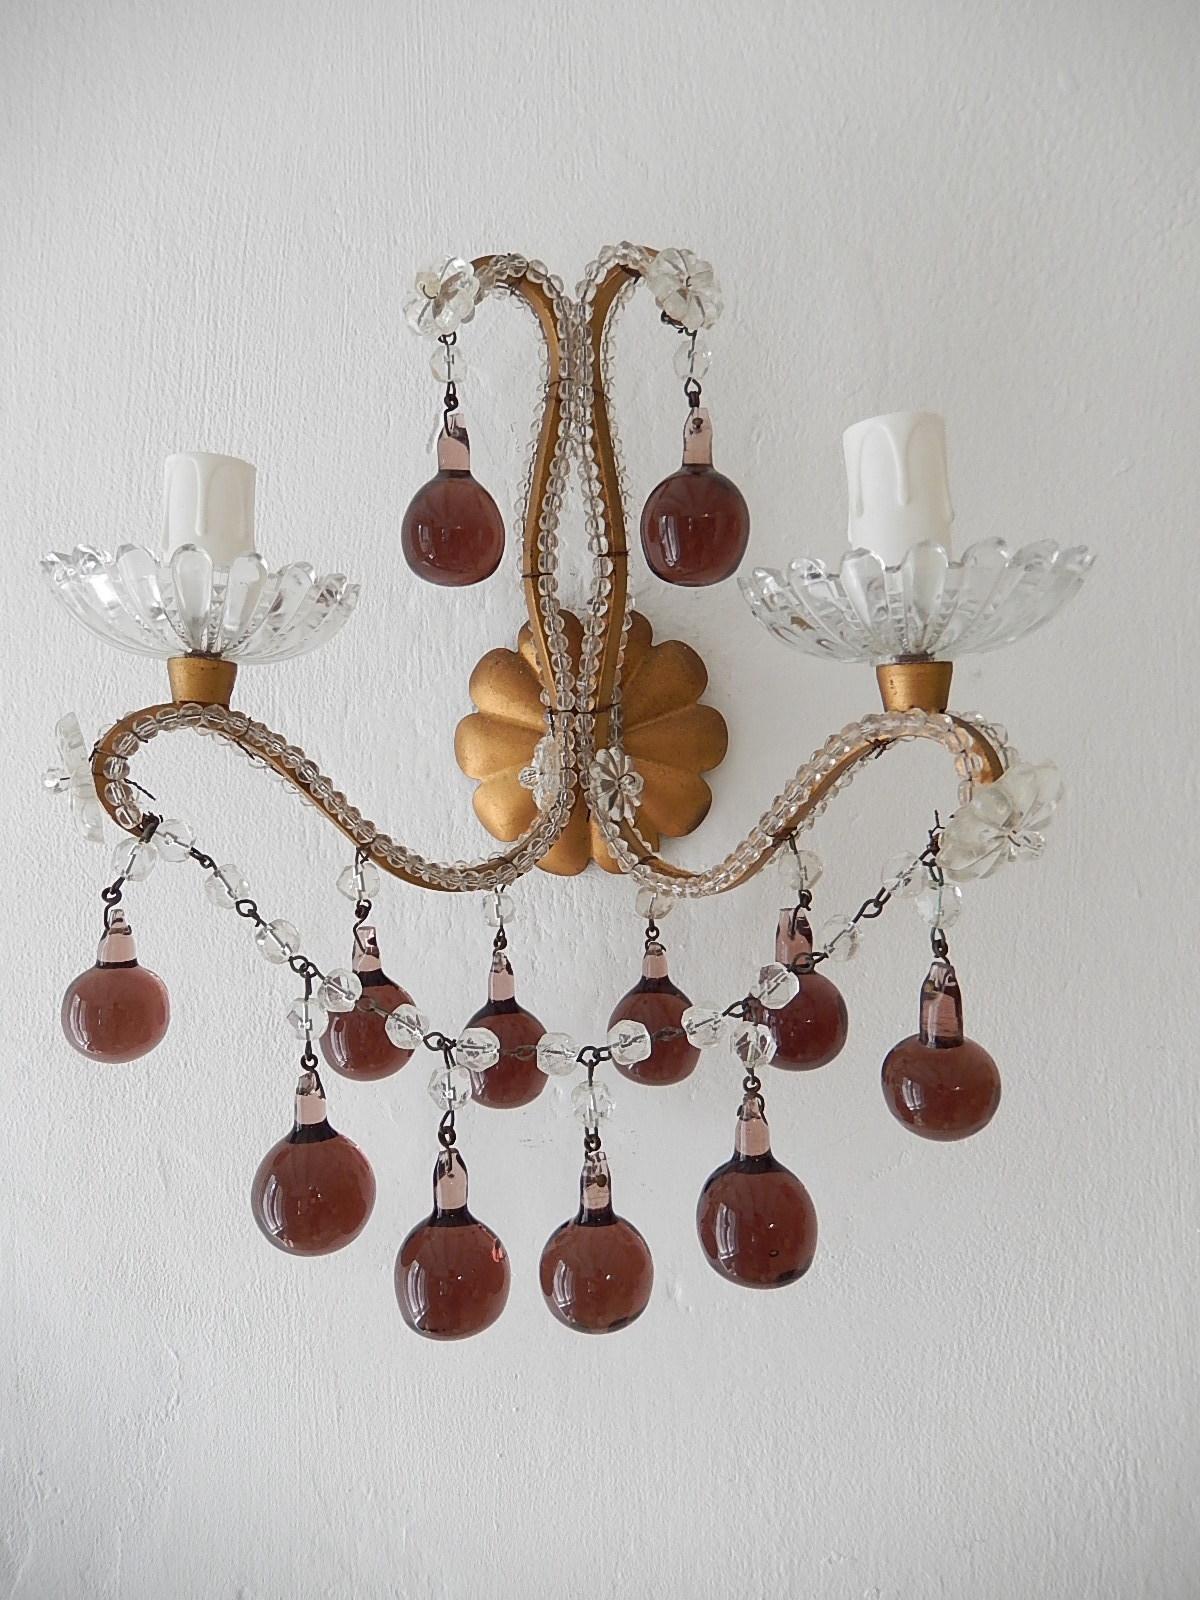 Crystal French Beaded Amethyst Murano Drops Sconces, circa 1920 For Sale